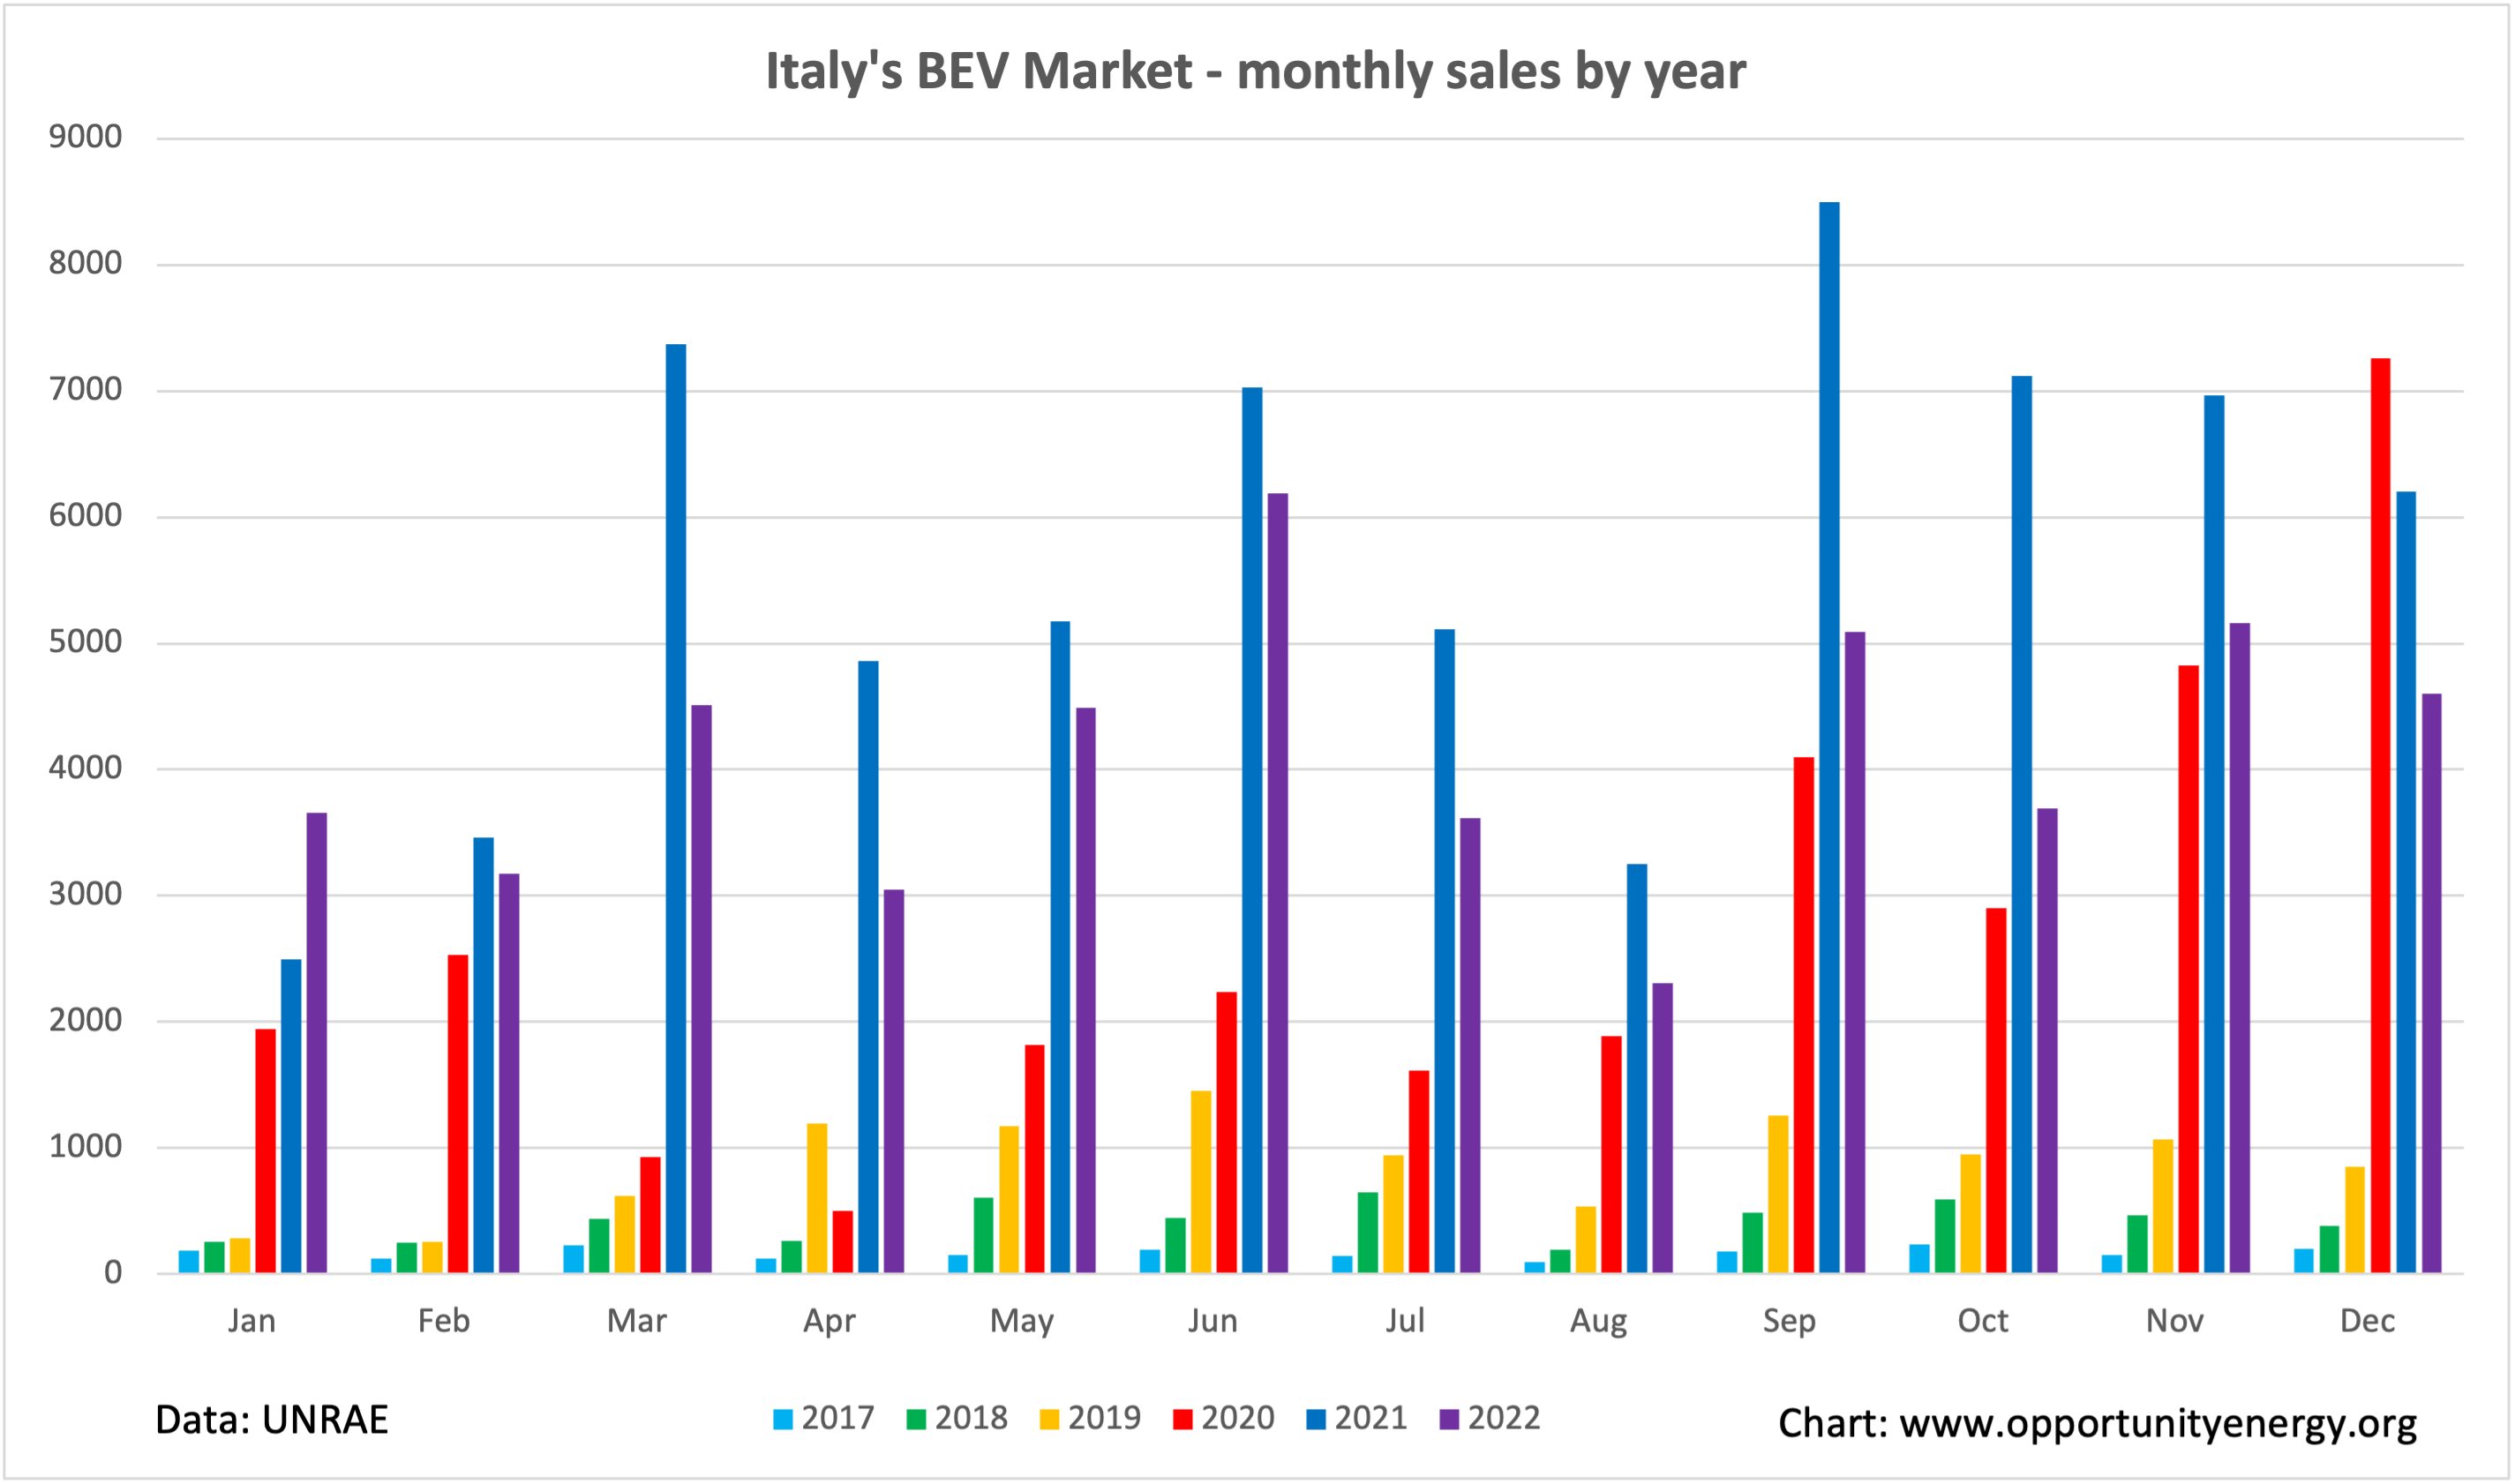 Italy BEV monthly market 2022